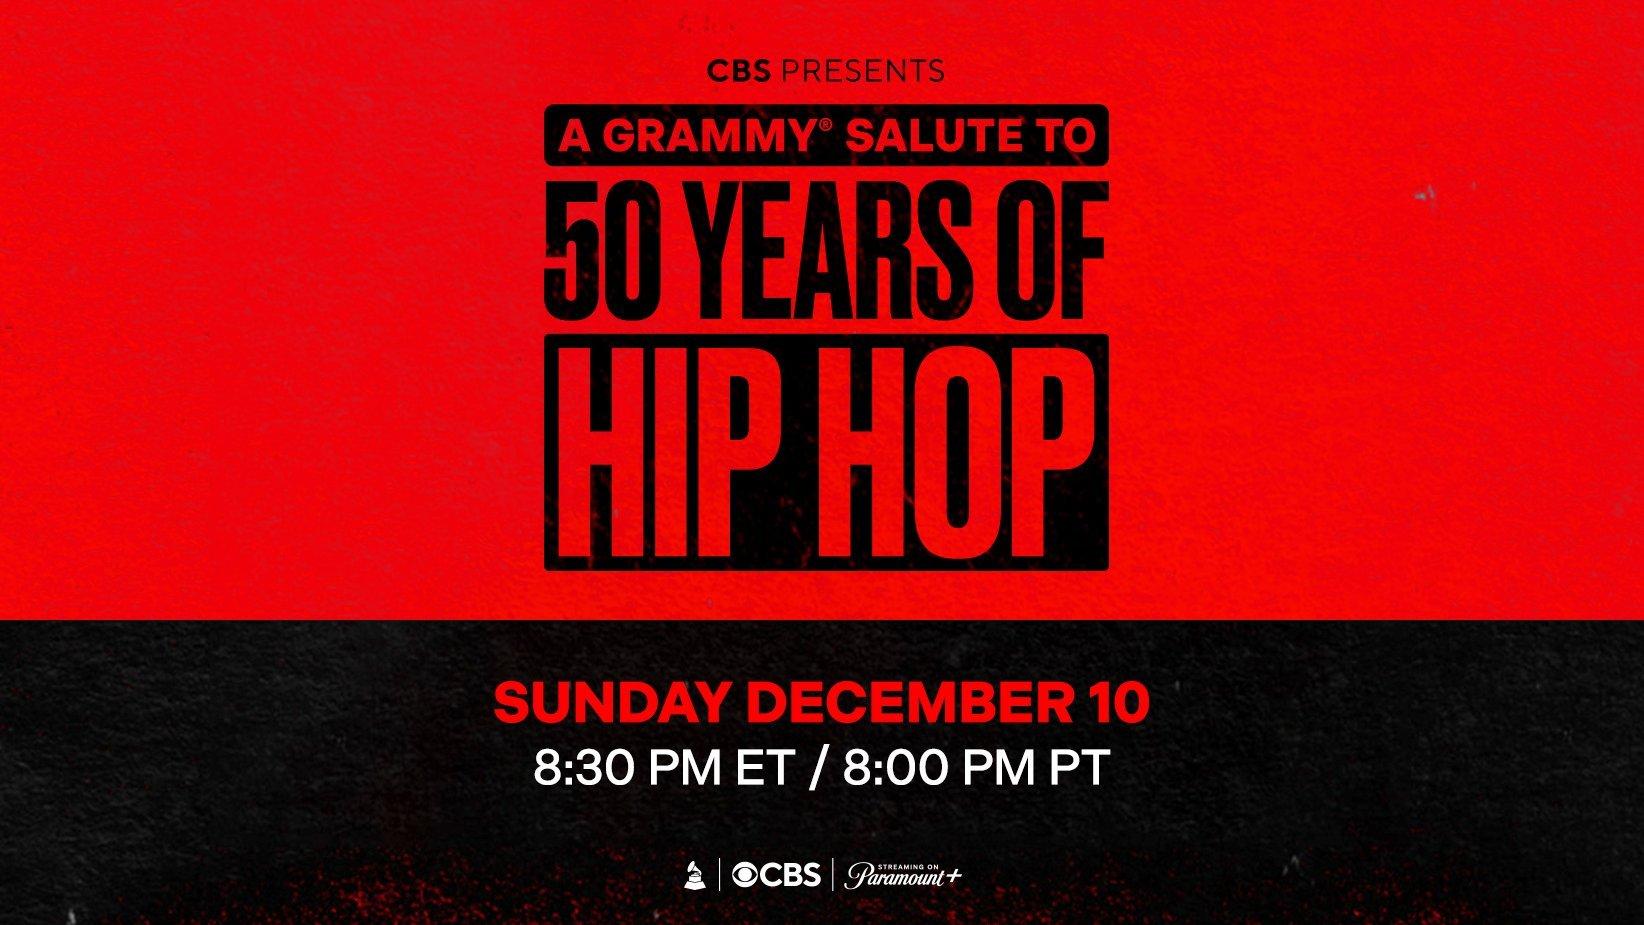 Ll Cool J Says A Grammy Salute To 50 Years Of Hip Hop Will Light A Fire Under The Rap Canon 